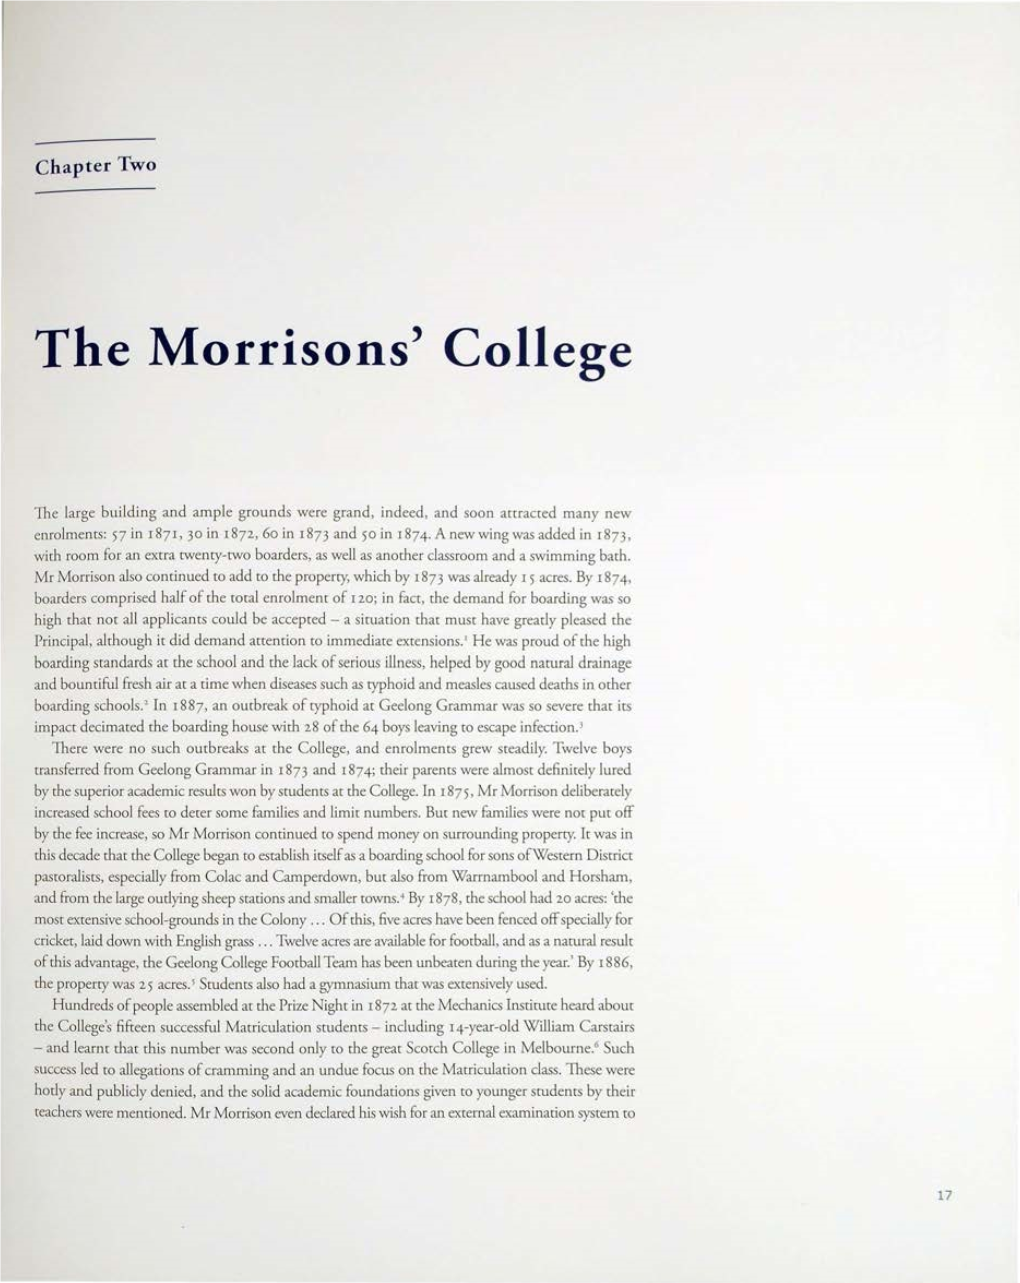 The Morrisons' College